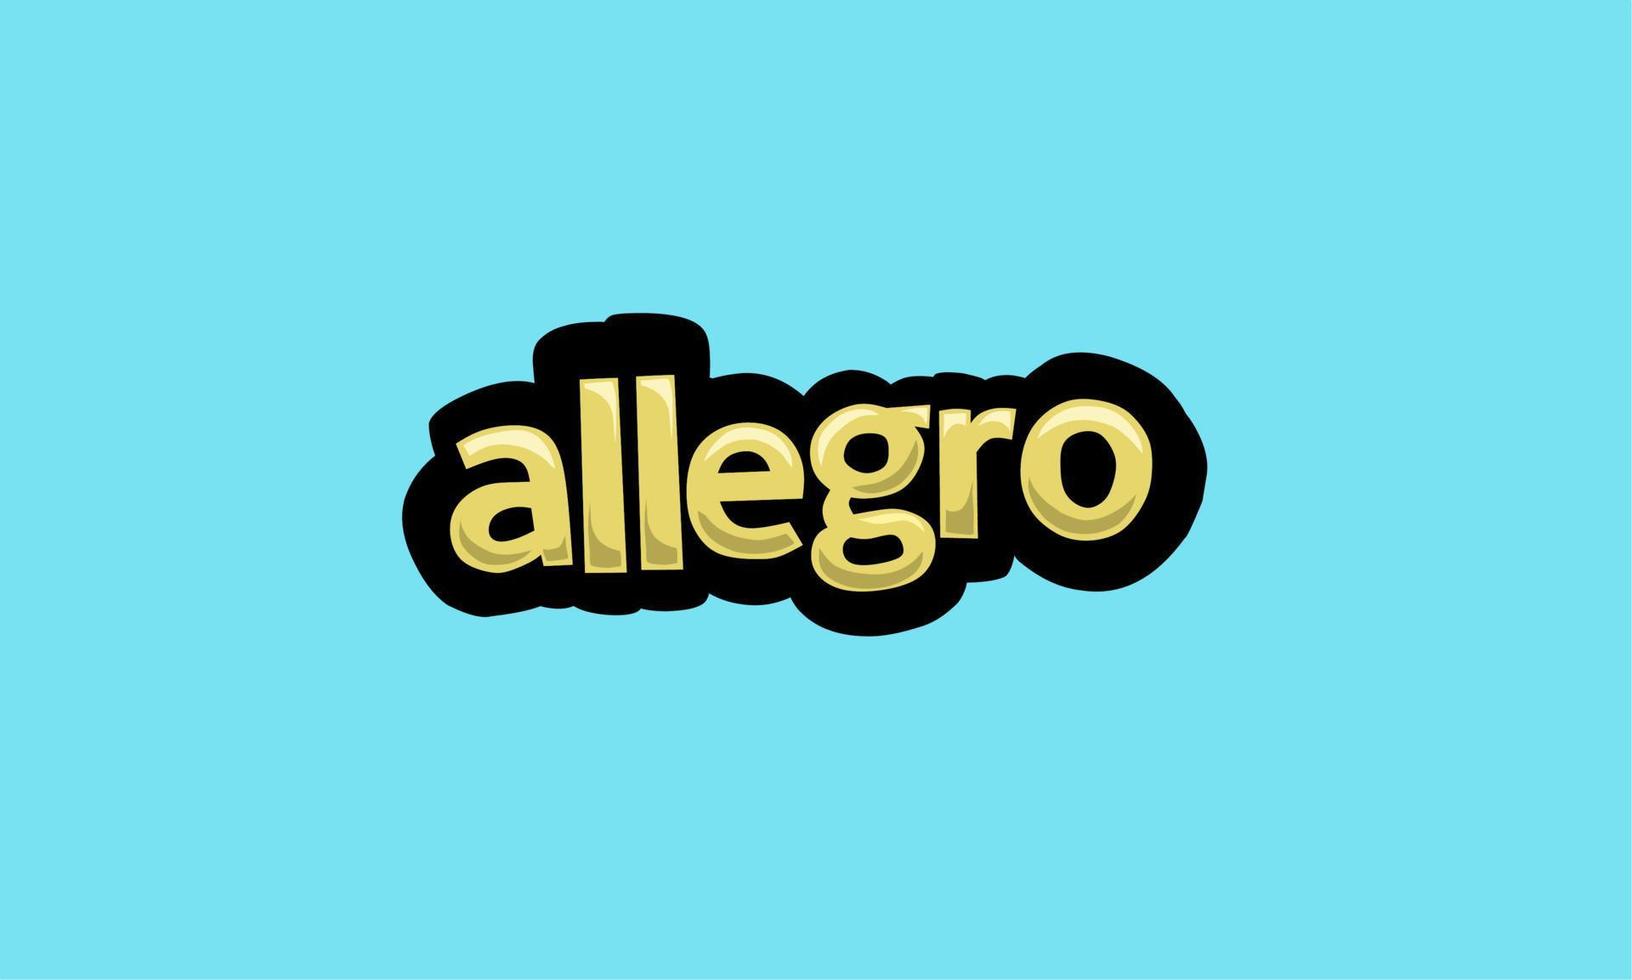 ALLEGRO writing vector design on a blue background